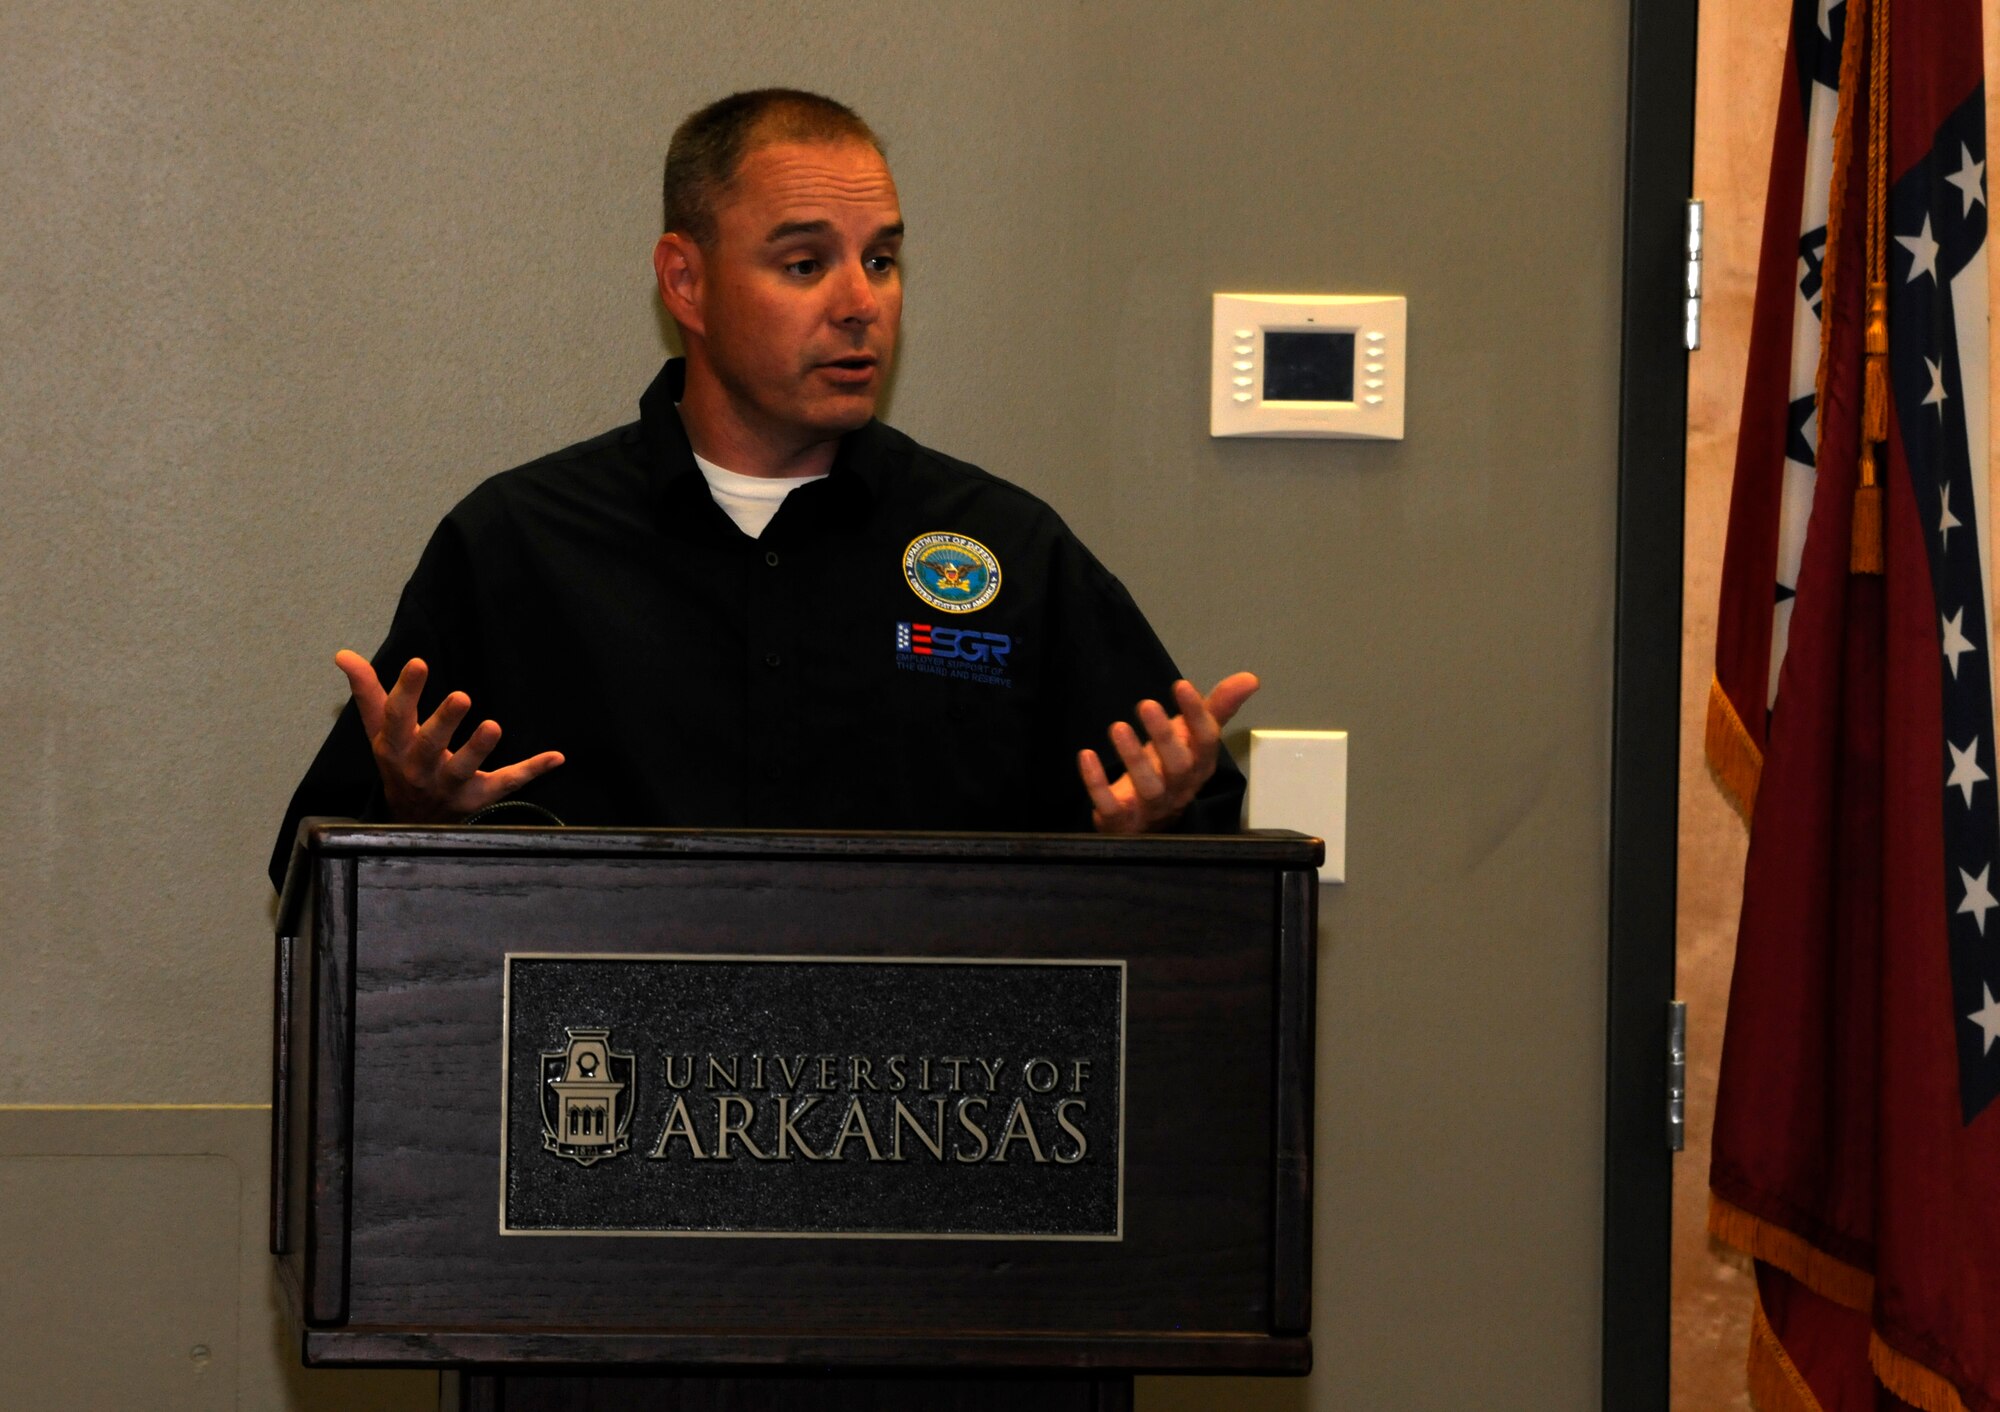 Kyle Fisher with Arkansas Employer Support of the Guard and Reserve addresses a gathering during an Employer Support of the Guard and Reserve Patriot award presentation held at the University of Arkansas Center for Multicultural and Diversity Education in Fayetteville, Arkansas, Sept. 19, 2014. Maj. Danielle Wood, 188th Wing Equal Opportunity chief, recognized her employer and supervisors for their support of her Air National Guard career during the event. Dr. Wood is also the UA Office of Equal Opportunity & Compliance director. (U.S. Air National Guard photo by Maj. Heath Allen/Released) 